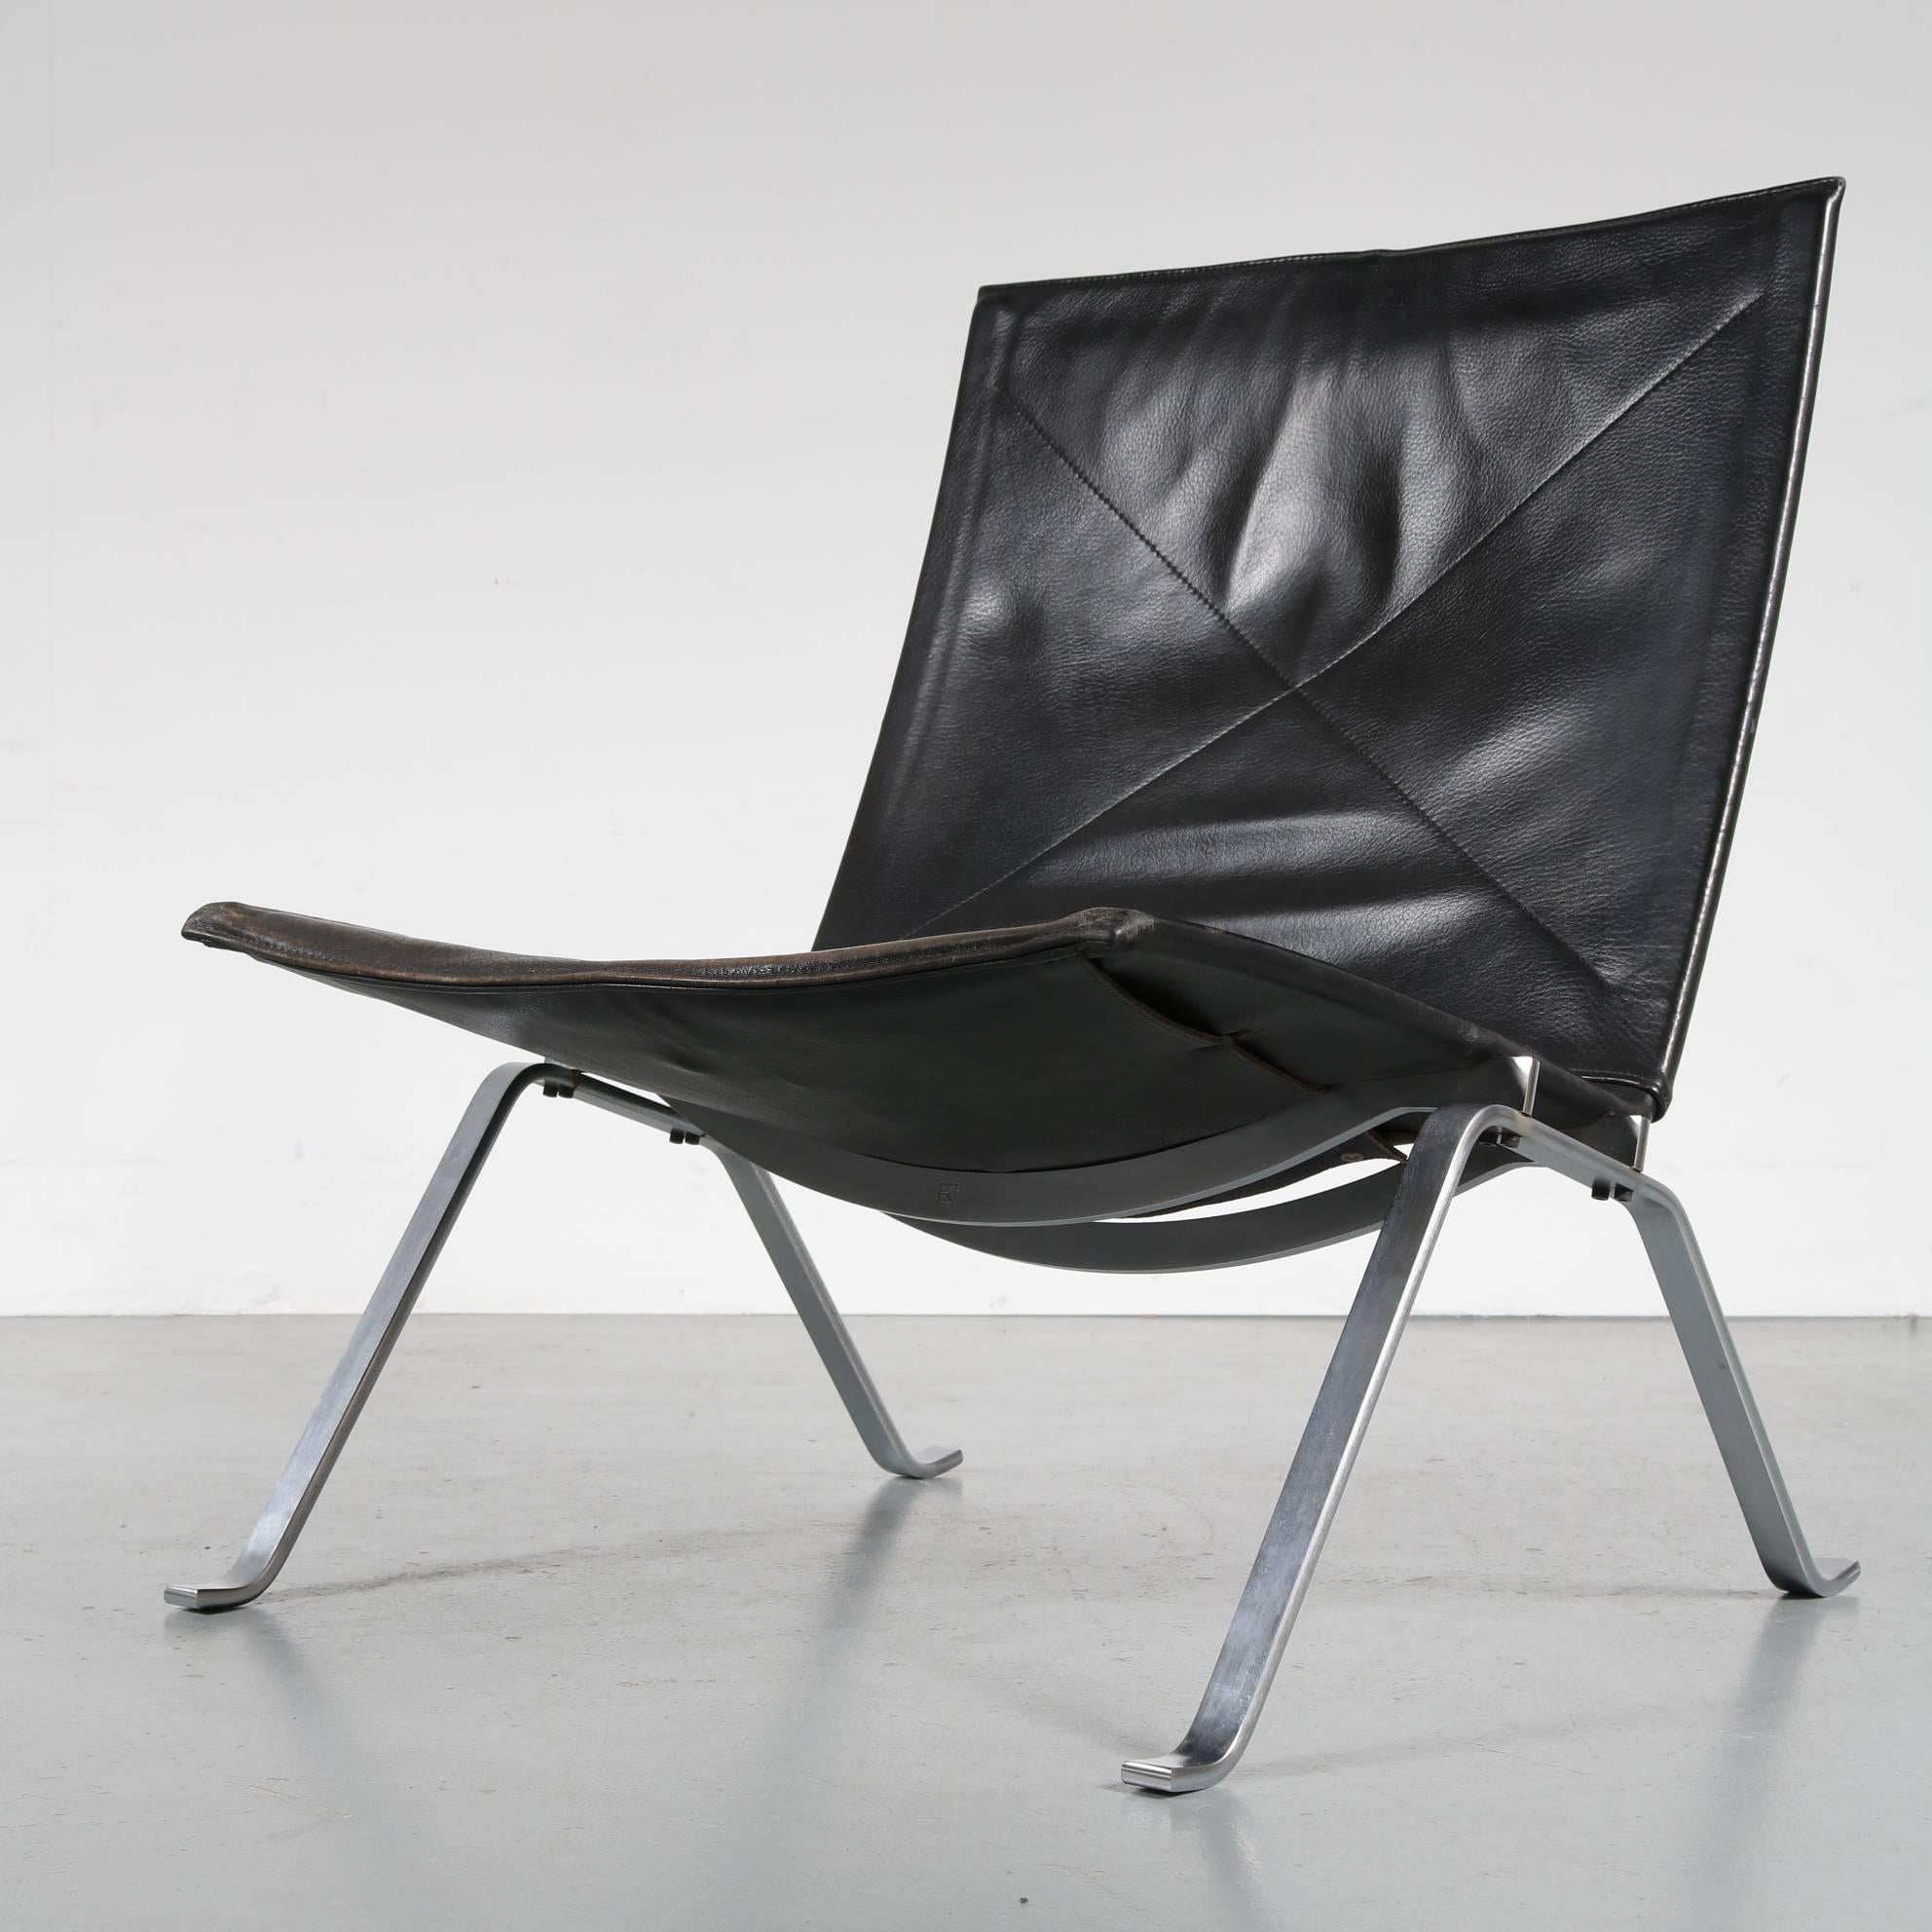 A stunning PK22 lounge chair, designed by Poul Kjaerholm, manufactured by E. Kold Christensen in Denmark, circa 1960.

The chair has a beautiful chrome-plated metal base. It is upholstered in high quality thick black leather. This use of materials